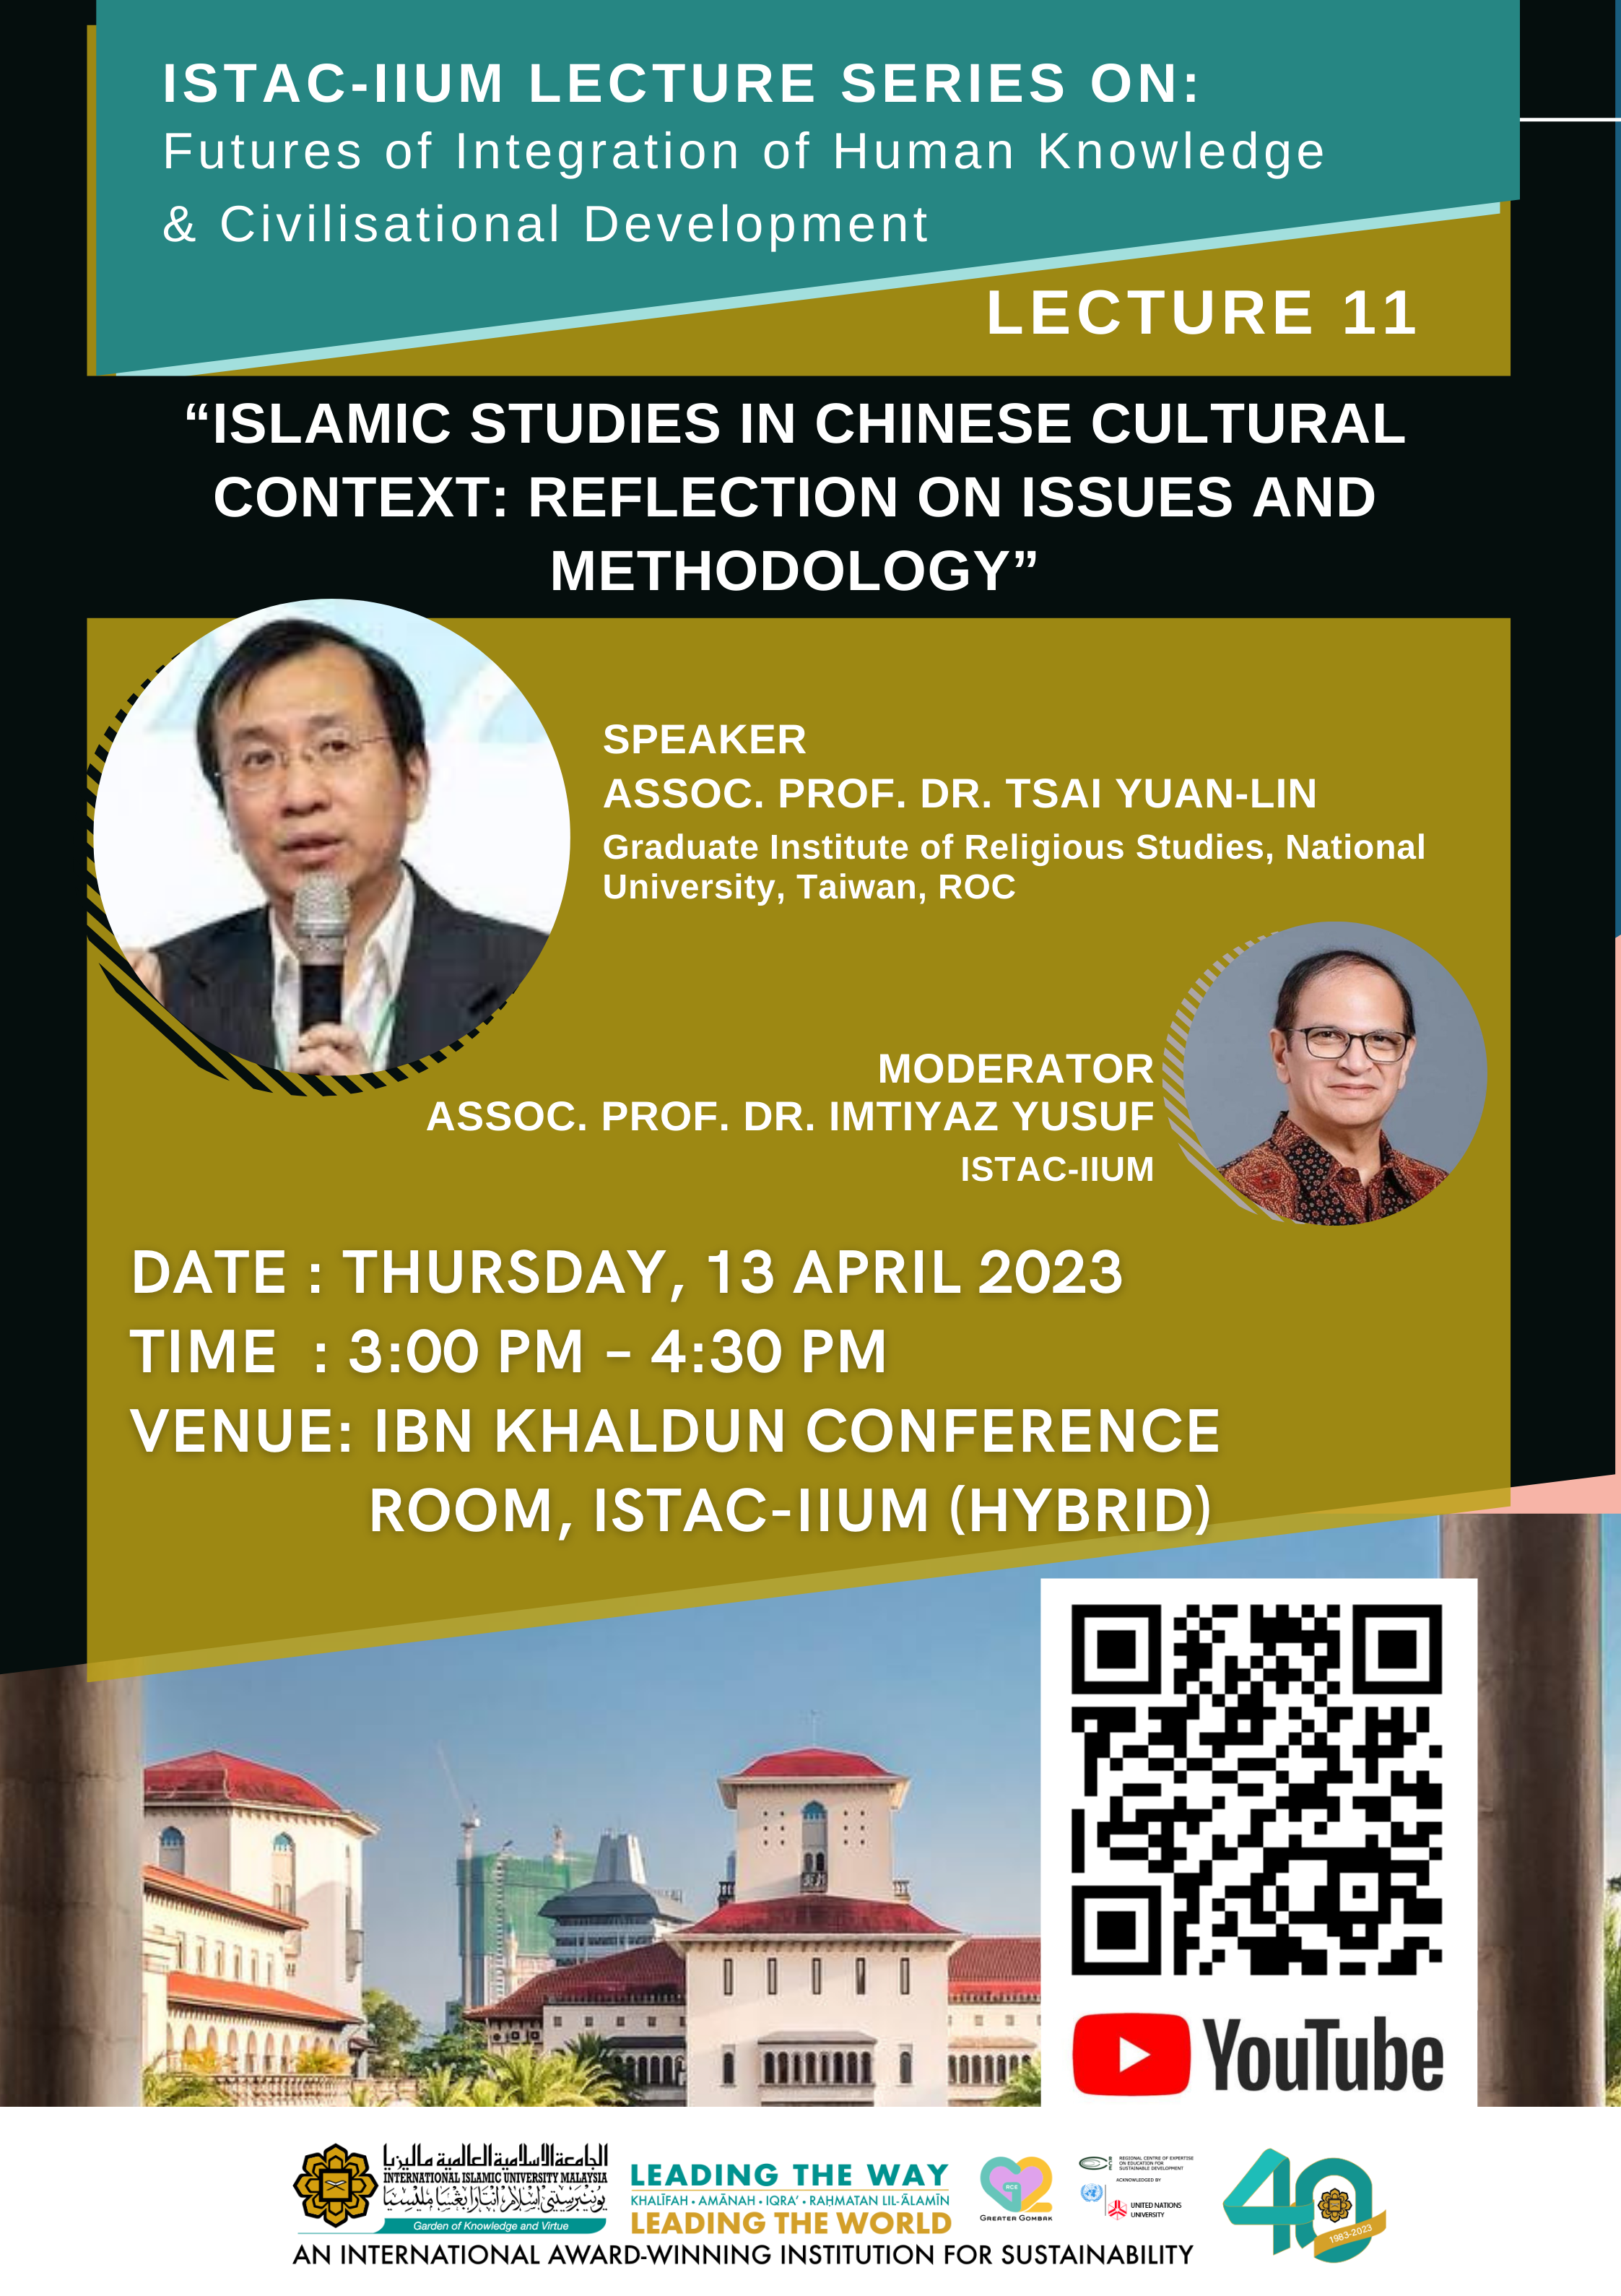 ISTAC-IIUM LECTURE SERIES ON FUTURES OF INTEGRATION OF HUMAN KNOWLEDGE & CIVILISATIONAL DEVELOPMENT_LECTURE 11